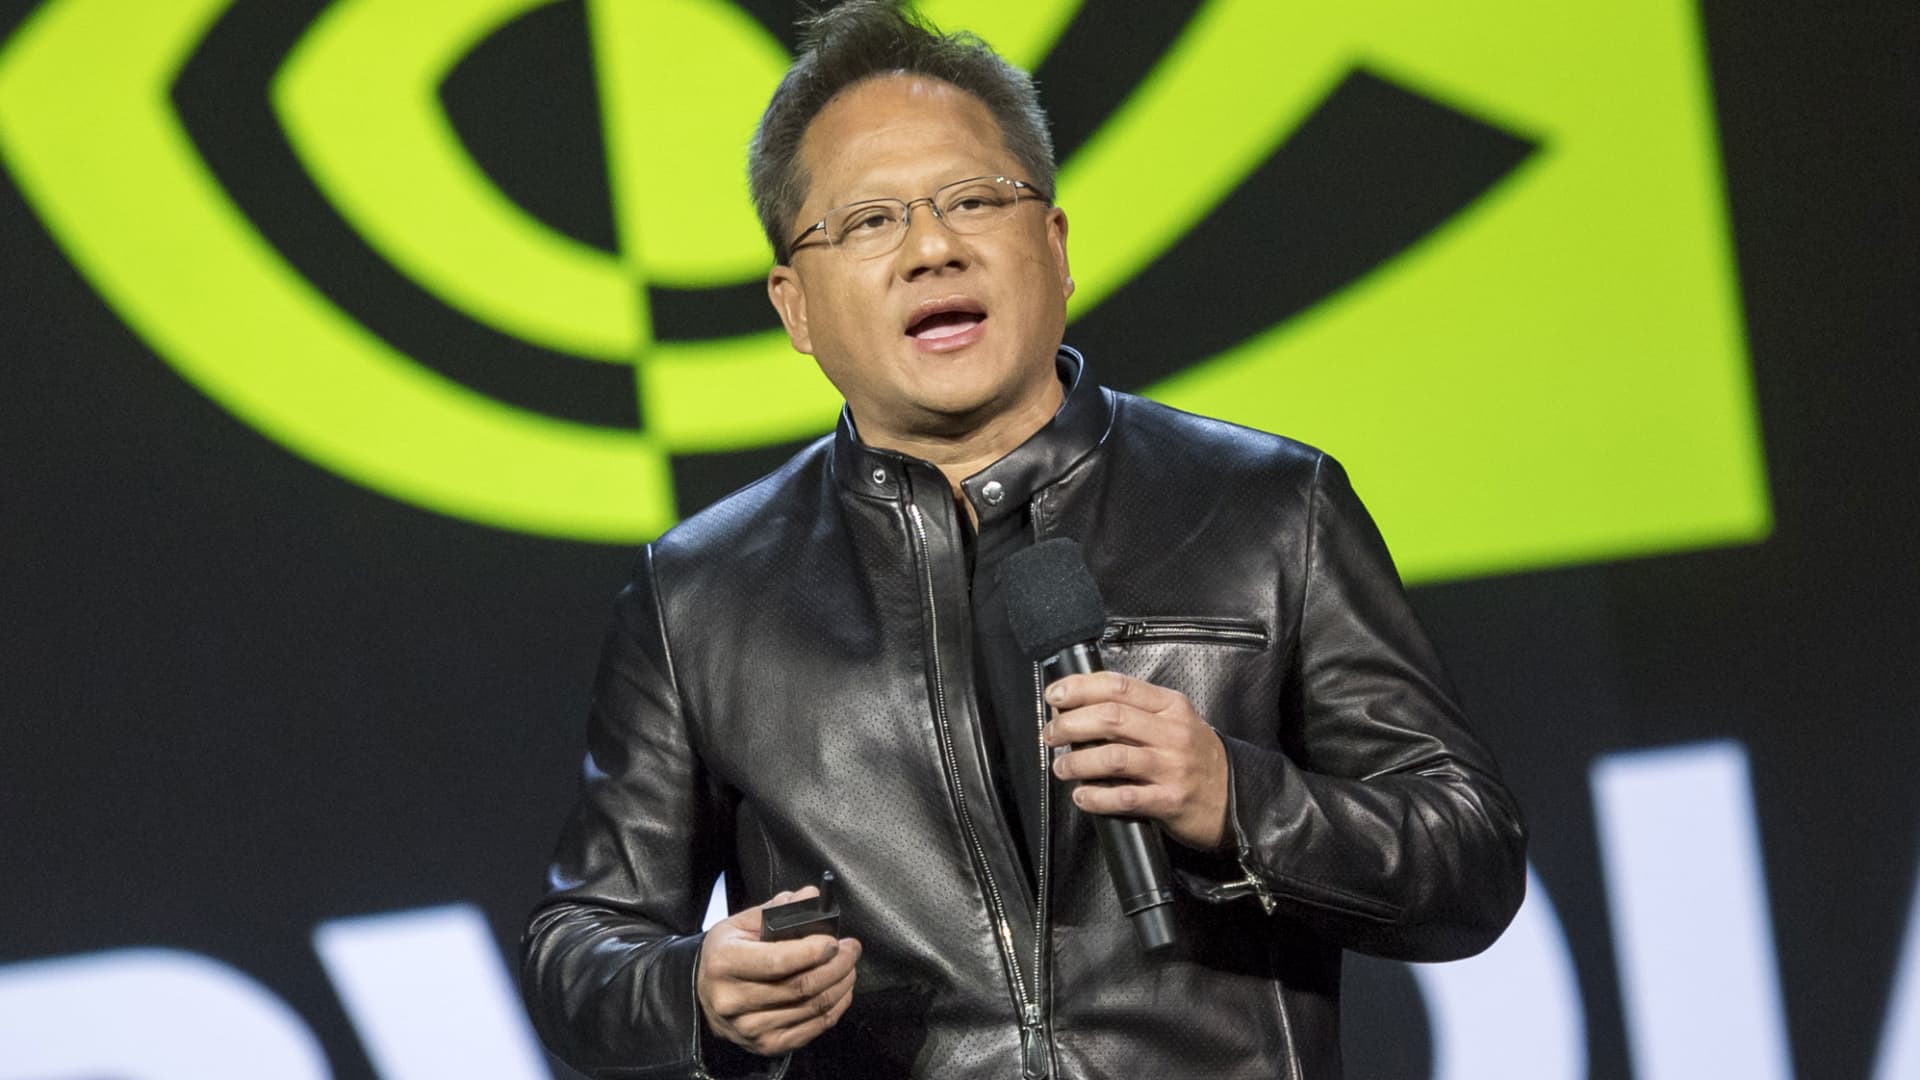 Nvidia stock jumps 7% after Morgan Stanley says chipmaker benefits from 'massive shift' in A.I.